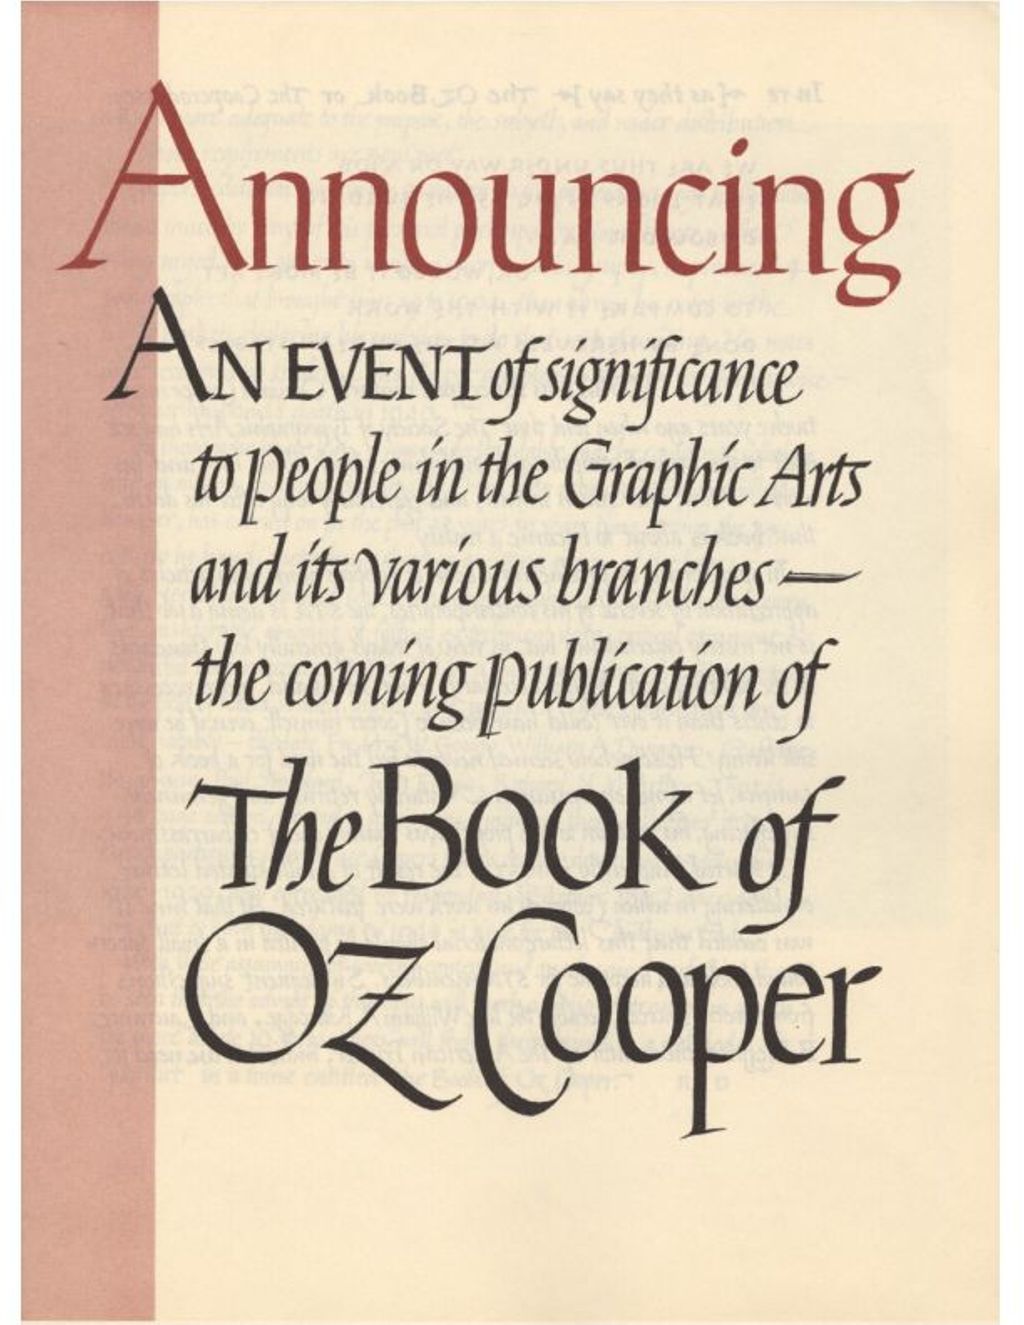 Announcement of the Publication of the Book of Oz Cooper